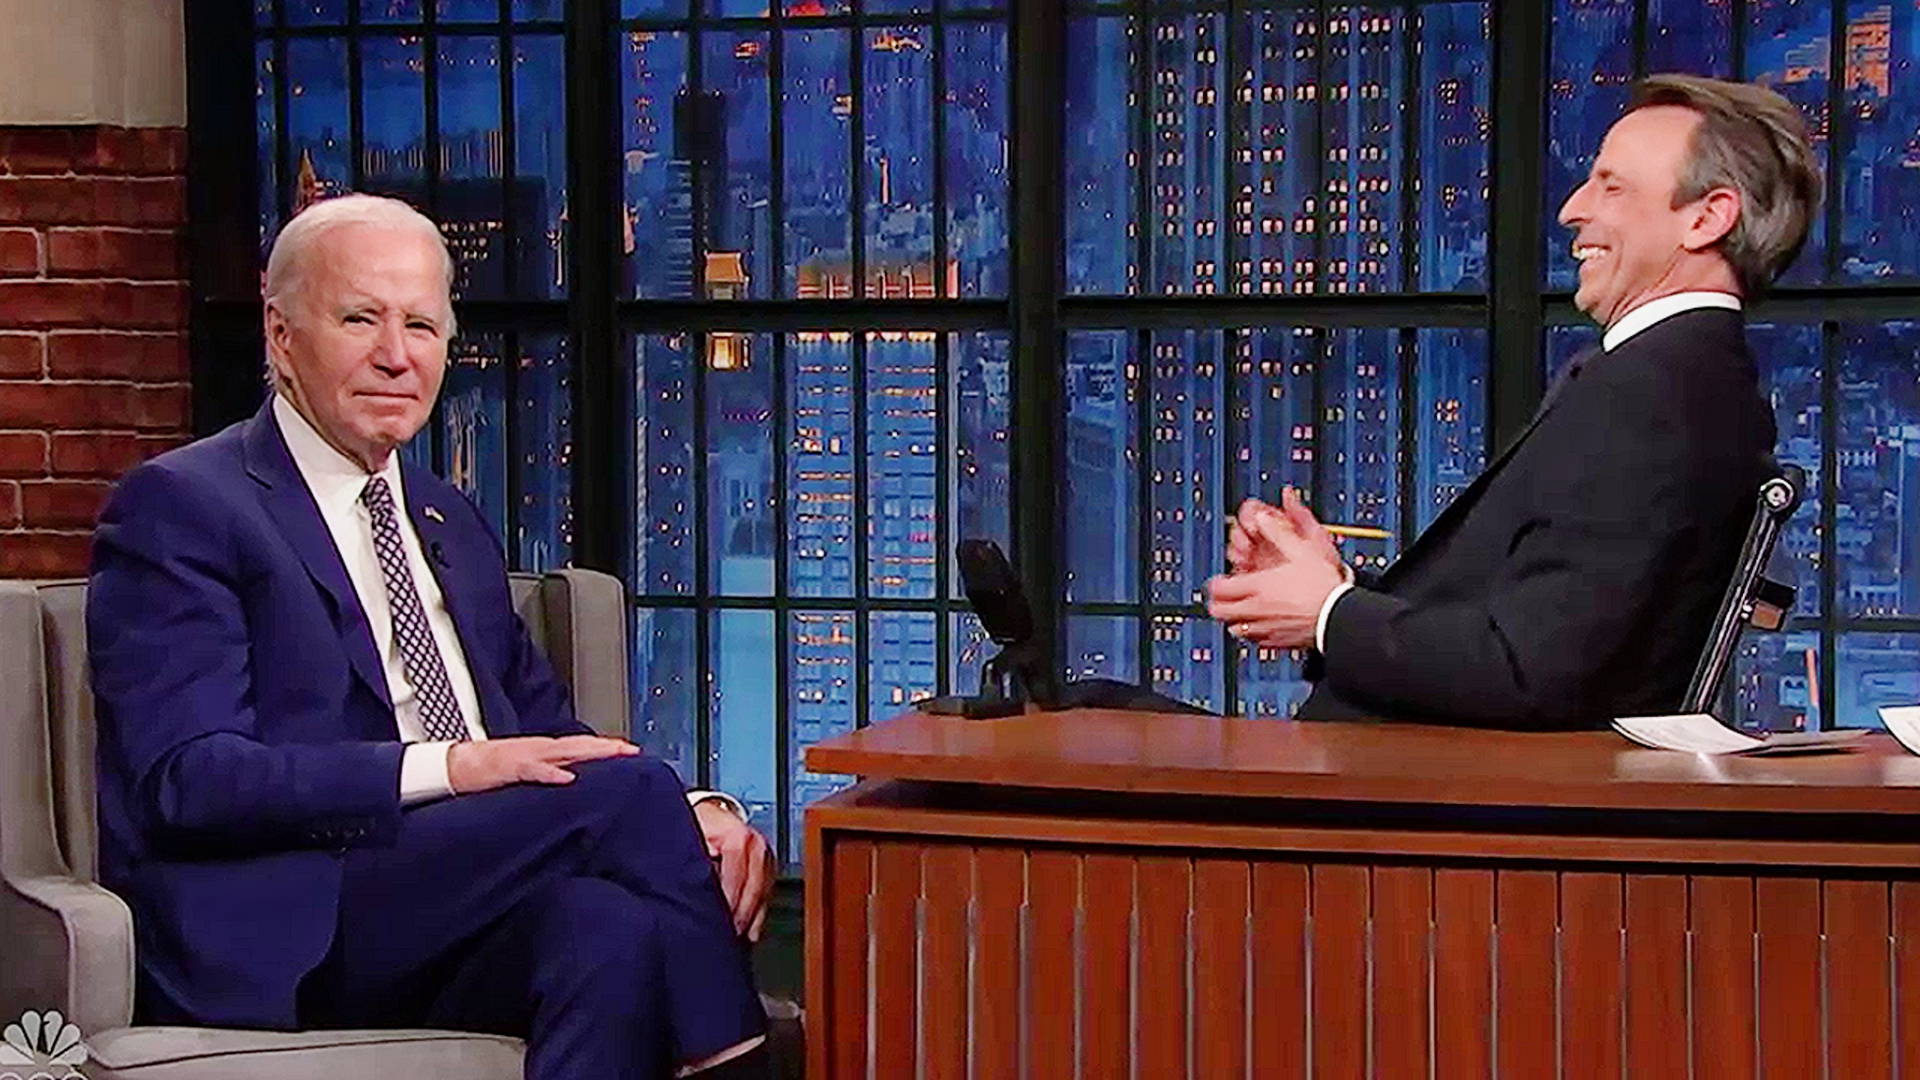 Biden’s Interview on ‘Late Night With Seth Meyers’ Sees Dip With Younger Viewers